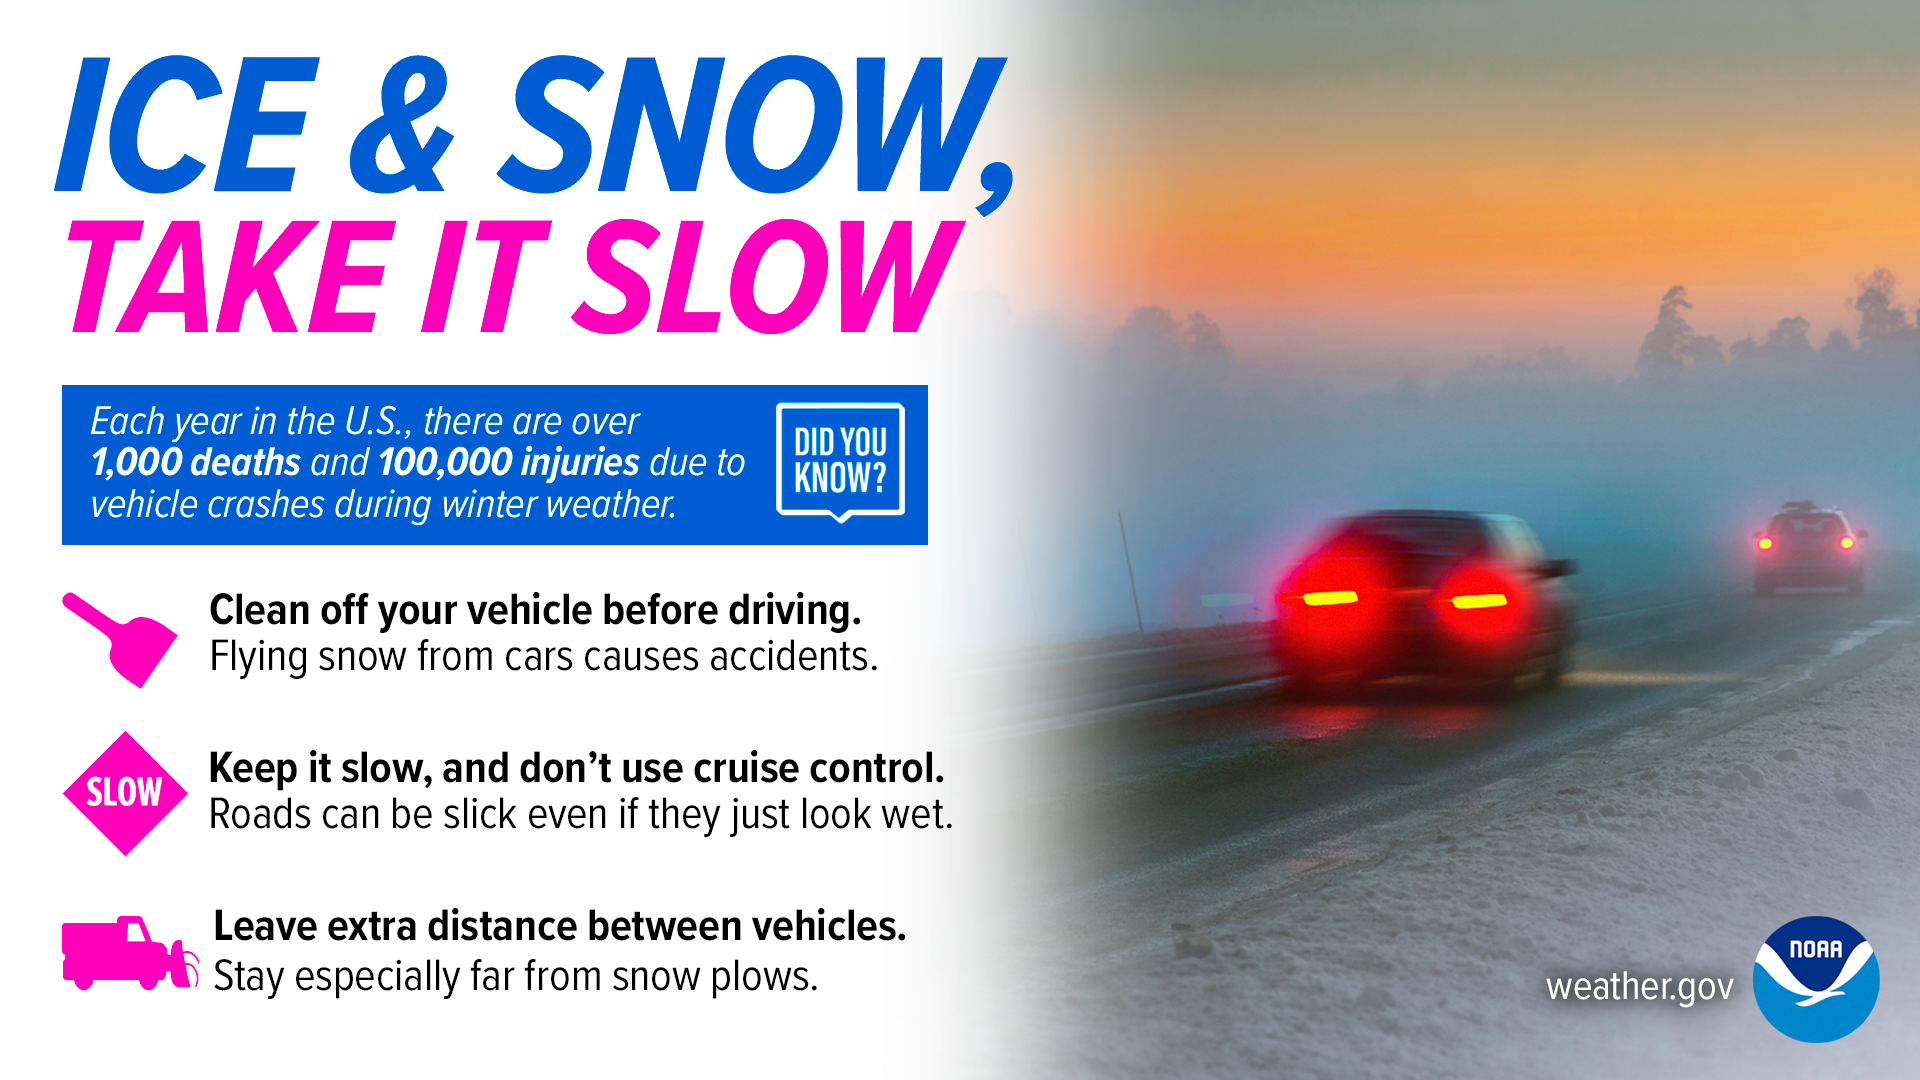 How to Drive in Snow Safely